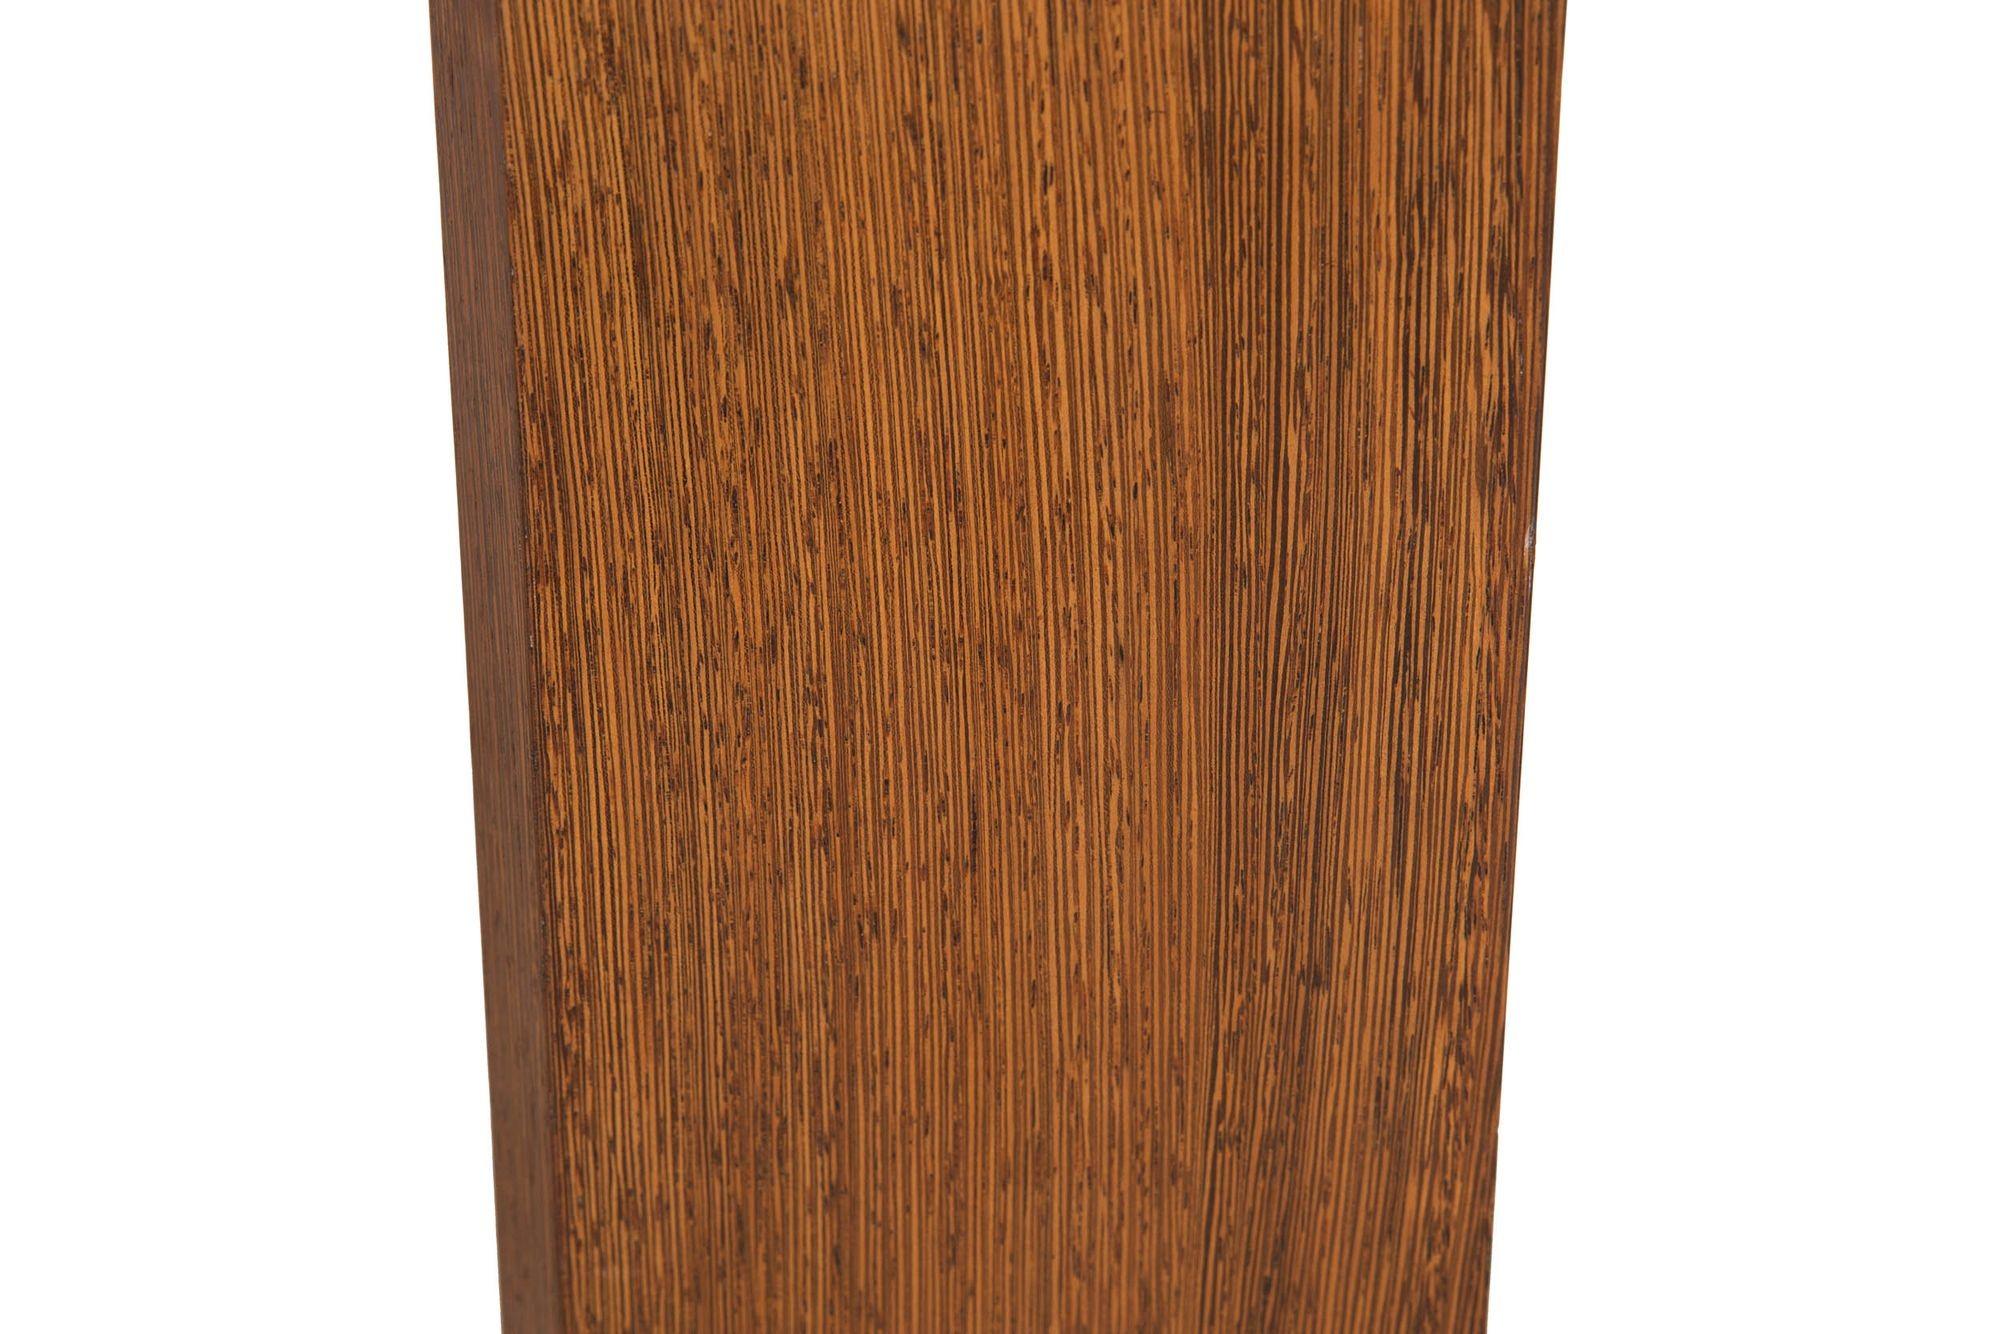 Post-Modern Ebony Hardwood Accent Table w/ Dovetailed Corners, circa 1987 For Sale 9